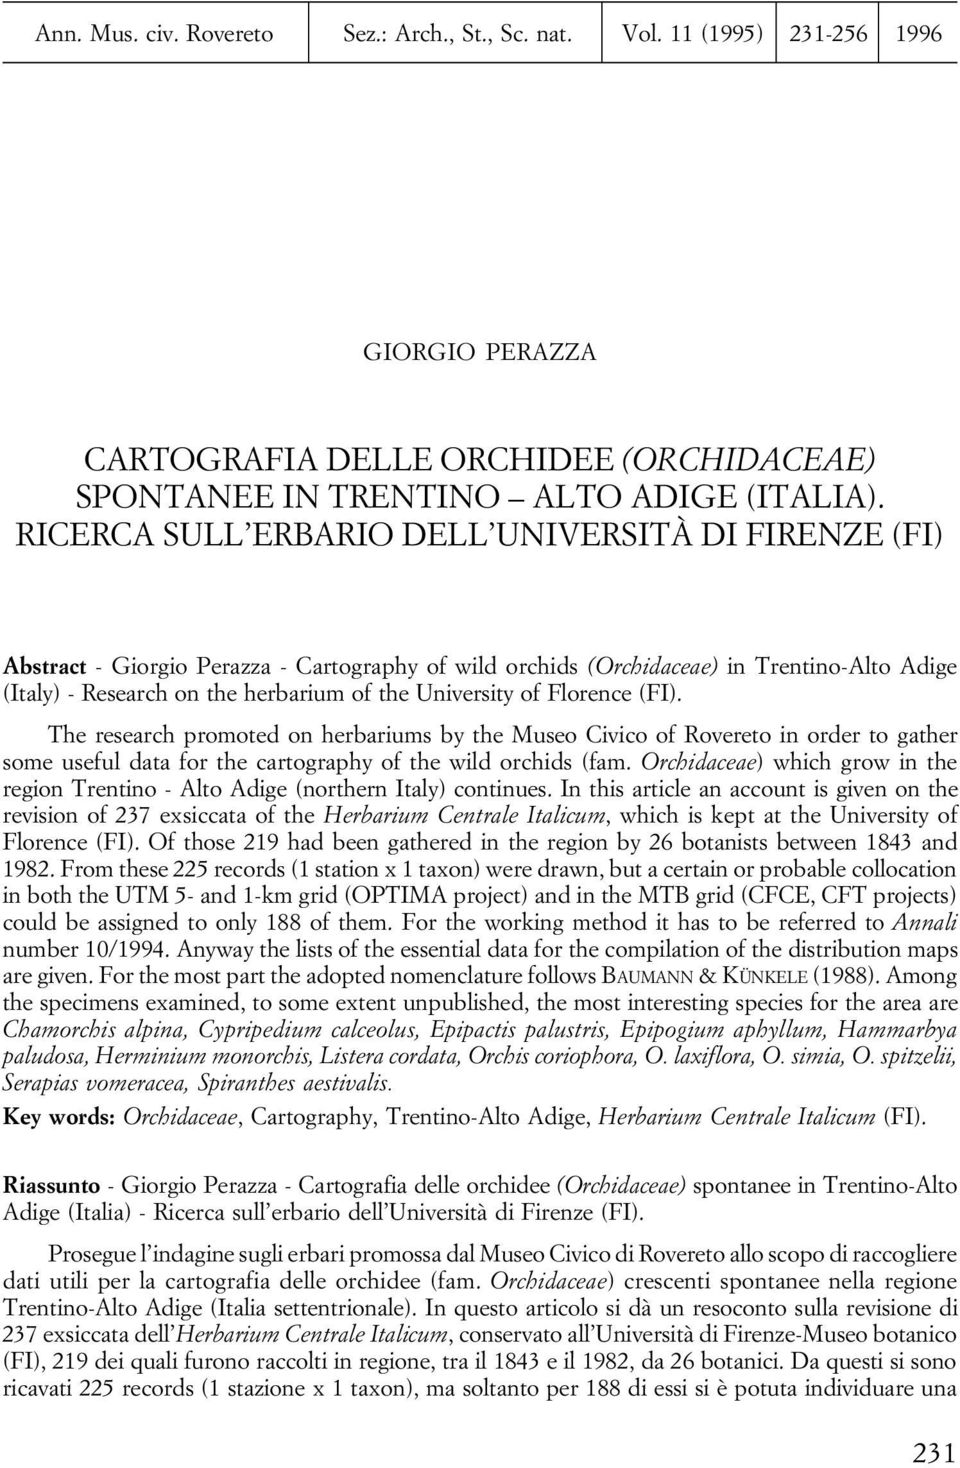 University of Florence (FI). The research promoted on herbariums by the Museo Civico of Rovereto in order to gather some useful data for the cartography of the wild orchids (fam.